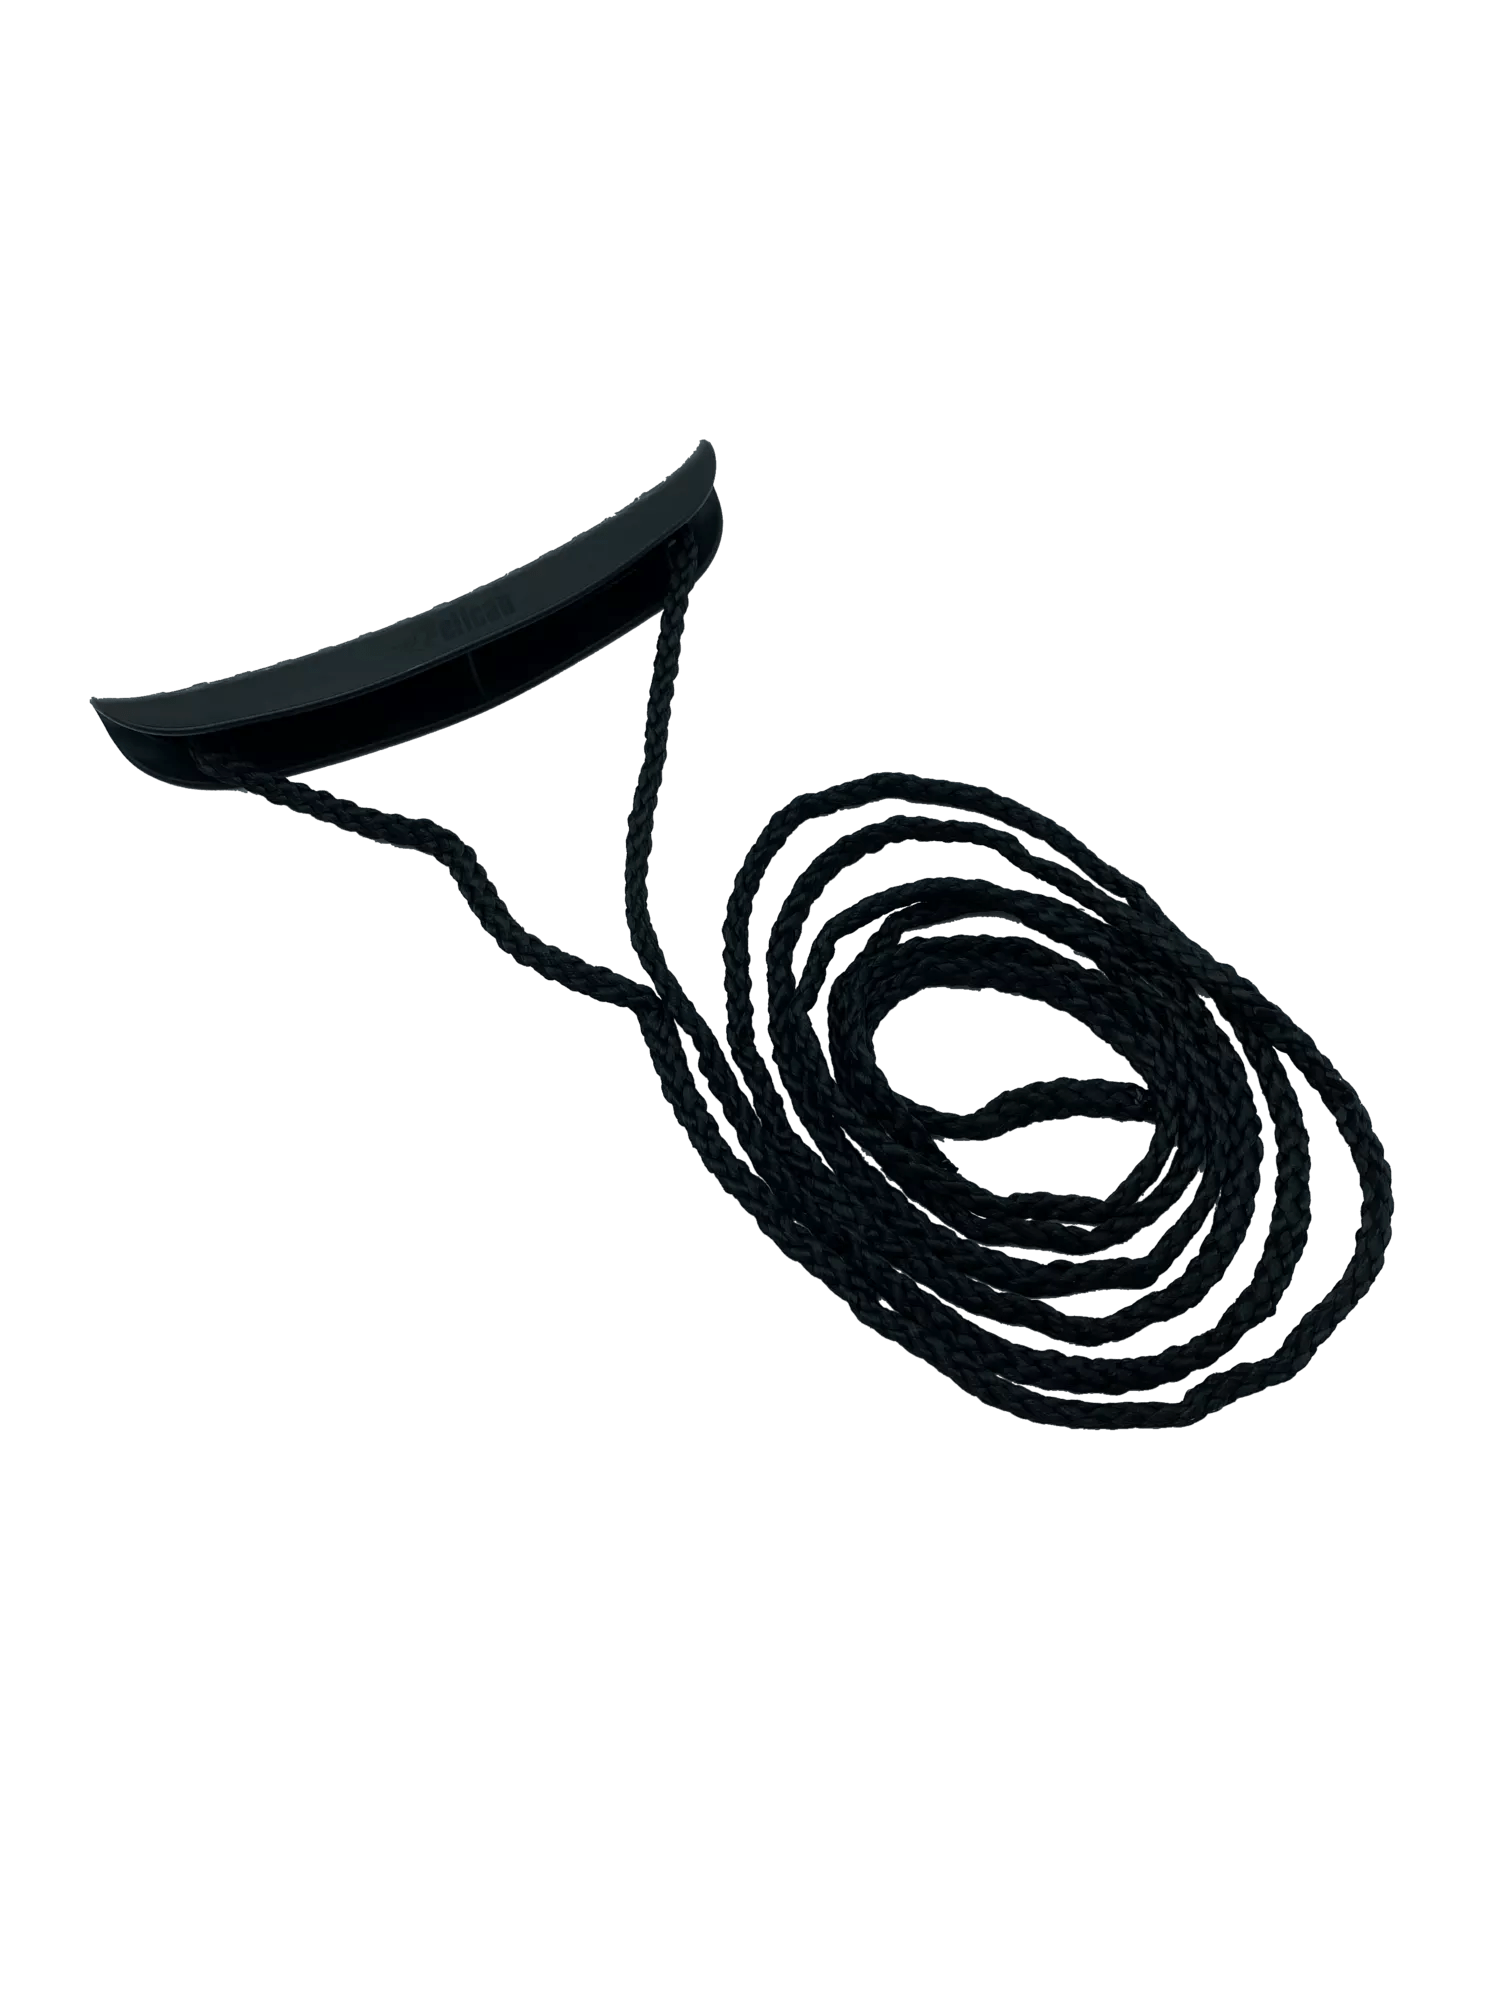 PELICAN - Black Polyester Rope with Handle 110 in. / 2.8m -  - PS2178-00 - ISO